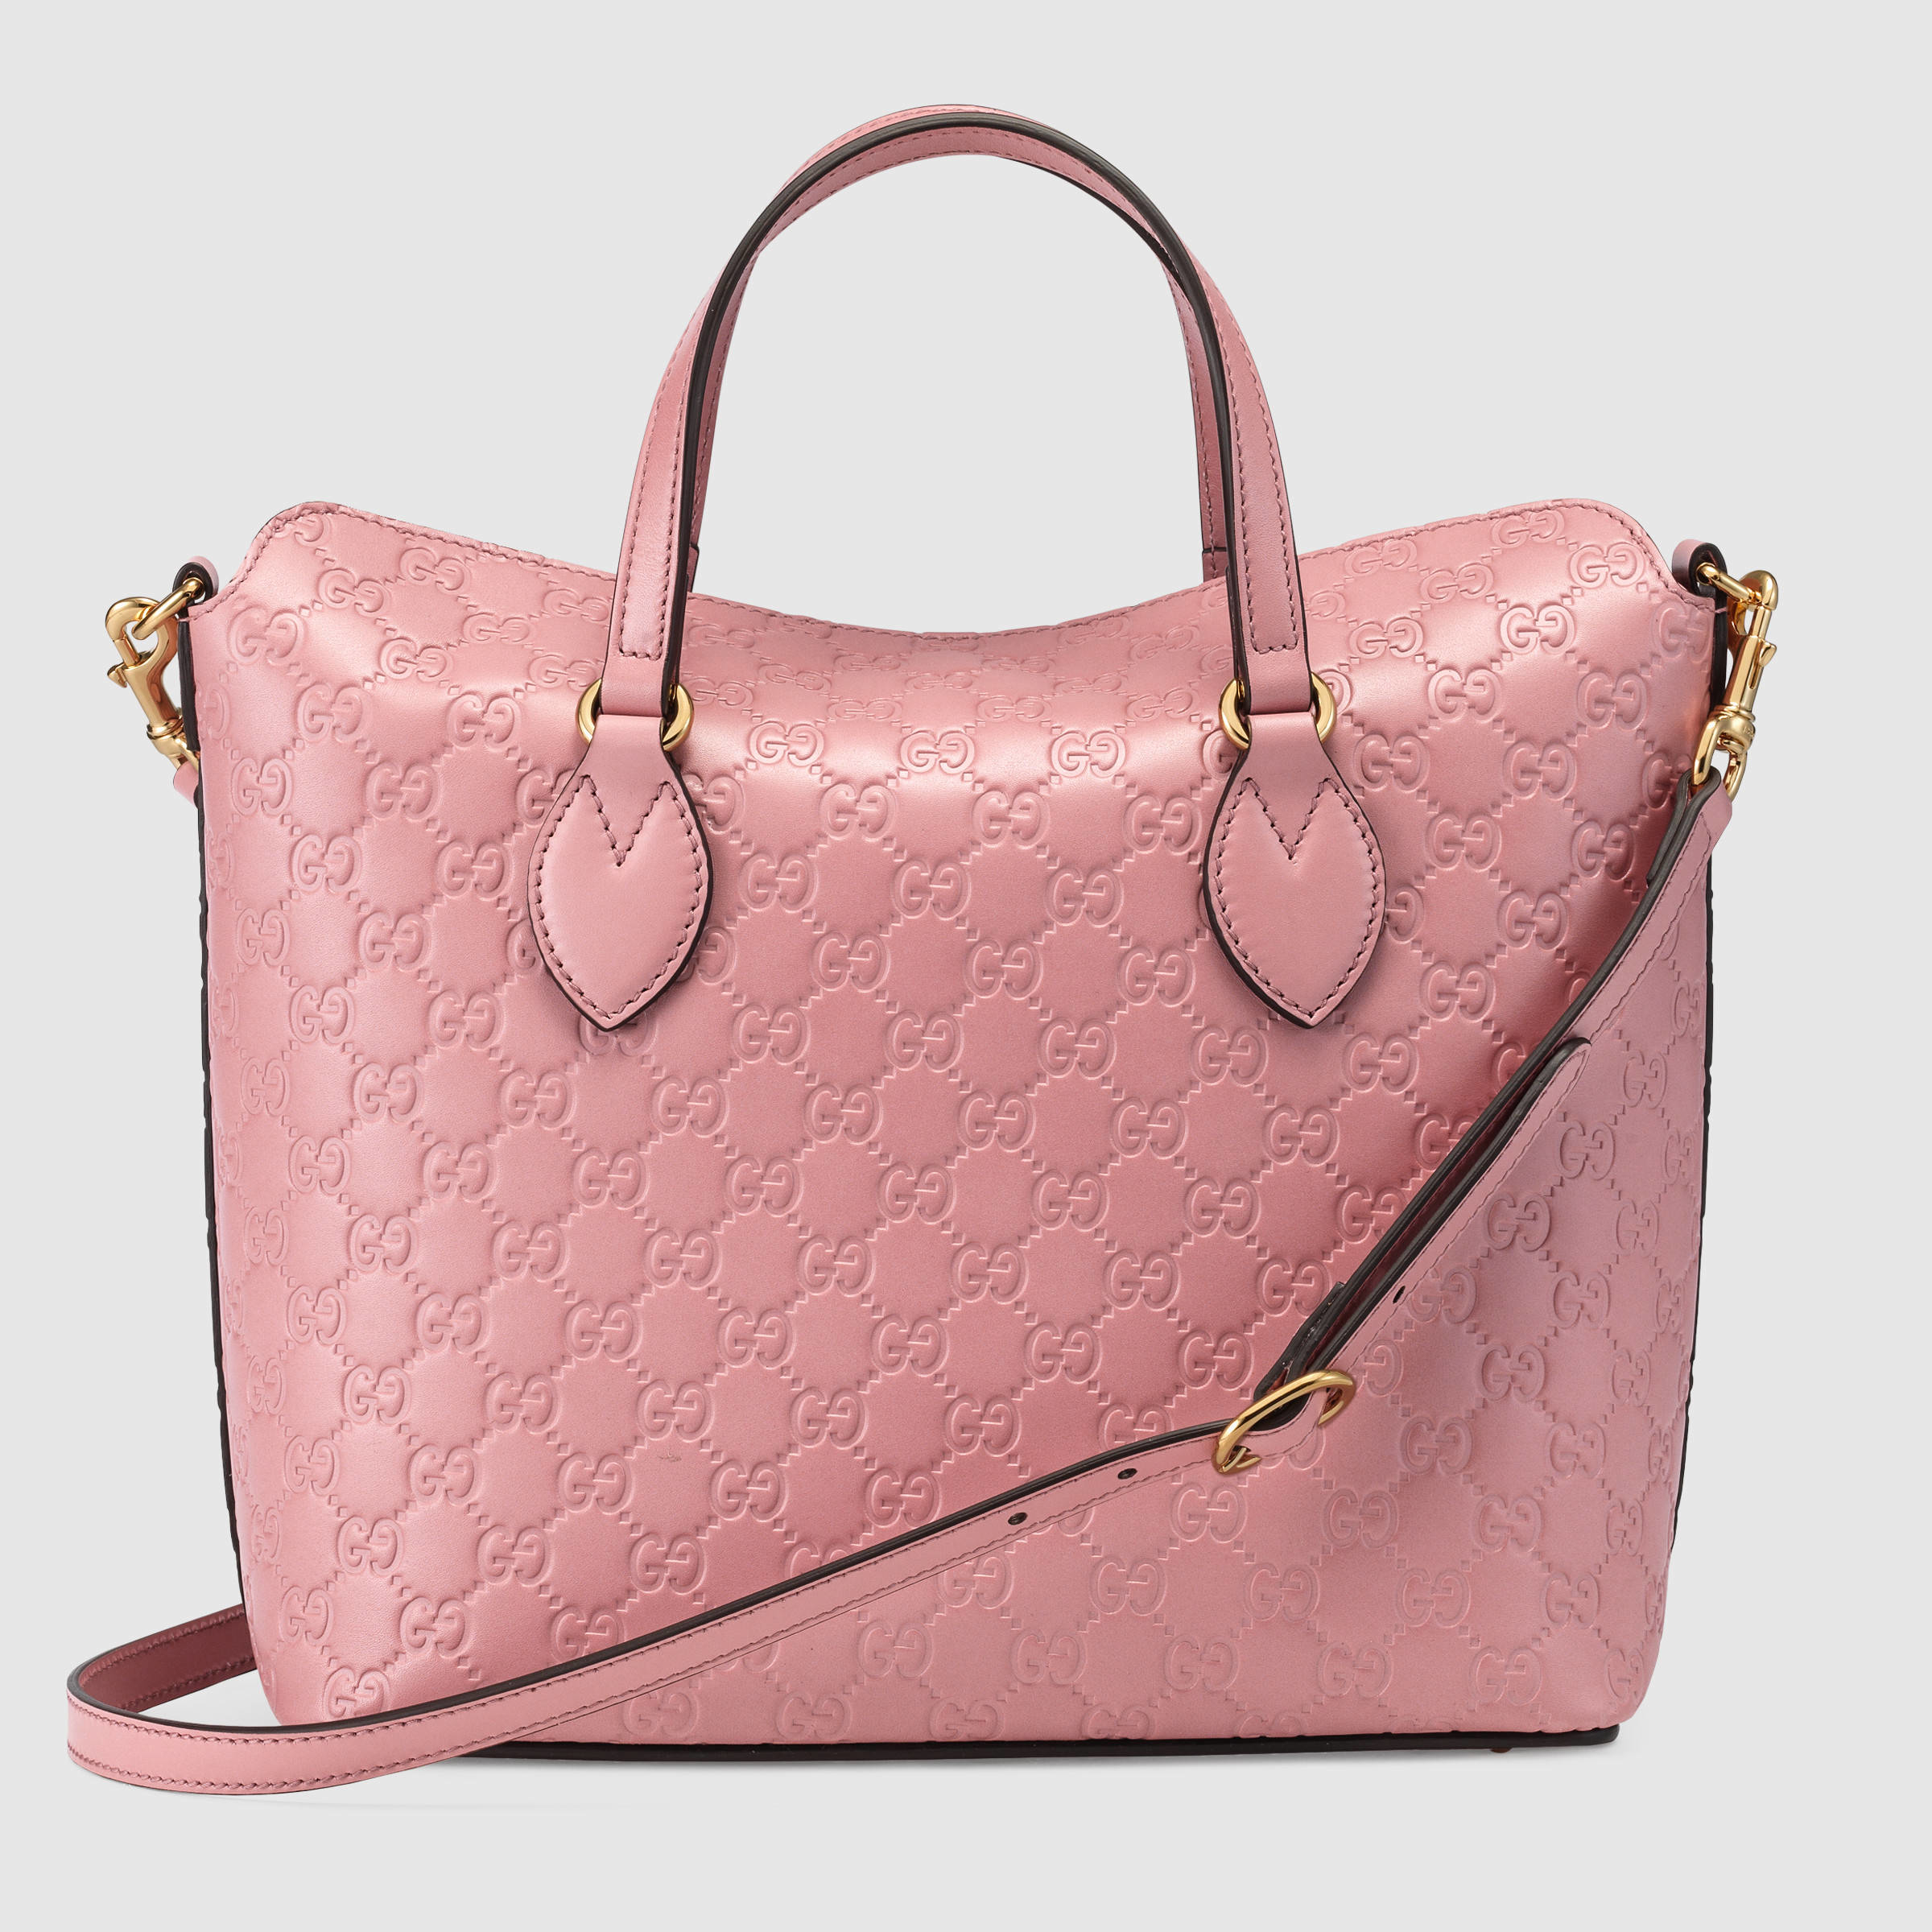 Lyst - Gucci Signature Leather Top Handle Bag in Pink